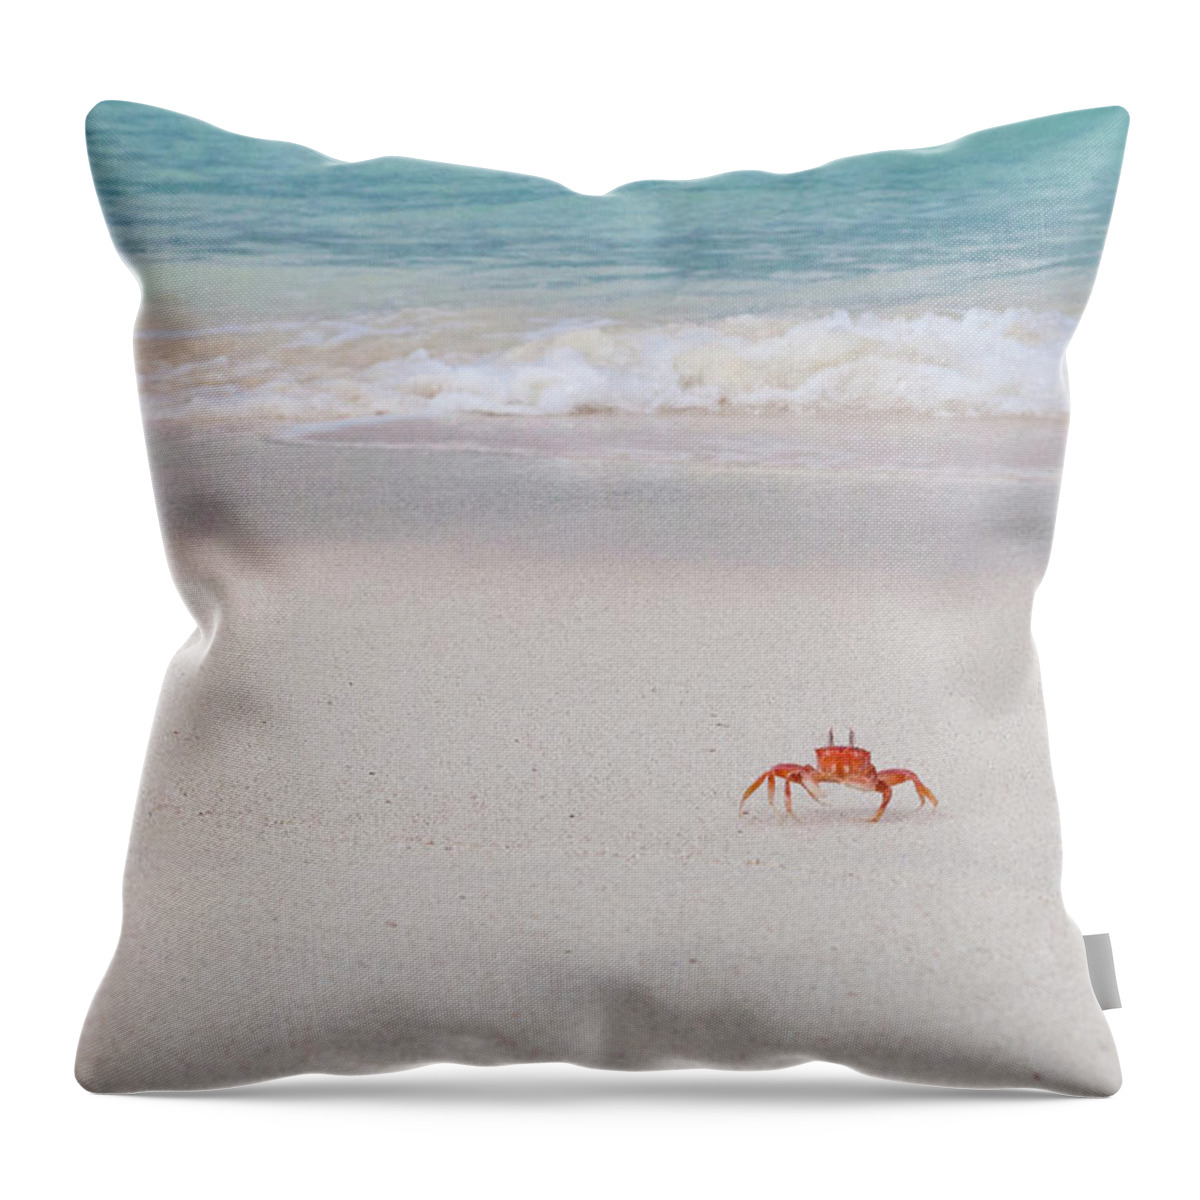 Water's Edge Throw Pillow featuring the photograph Sally Lightfoot Crab, Galapagos Islands by Original Photography